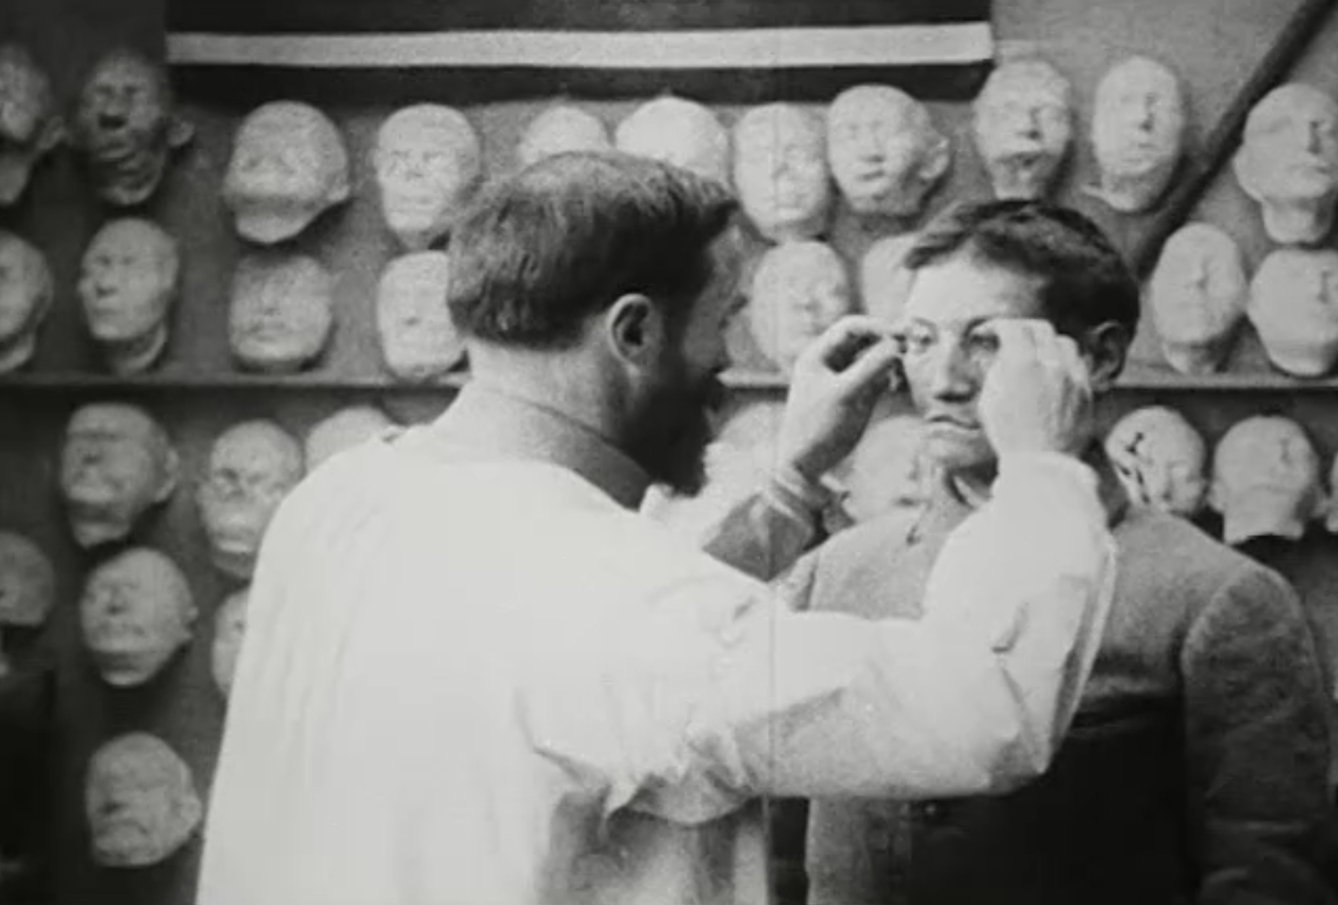 A man in a white coat adjusts the spectacles on another man's face.